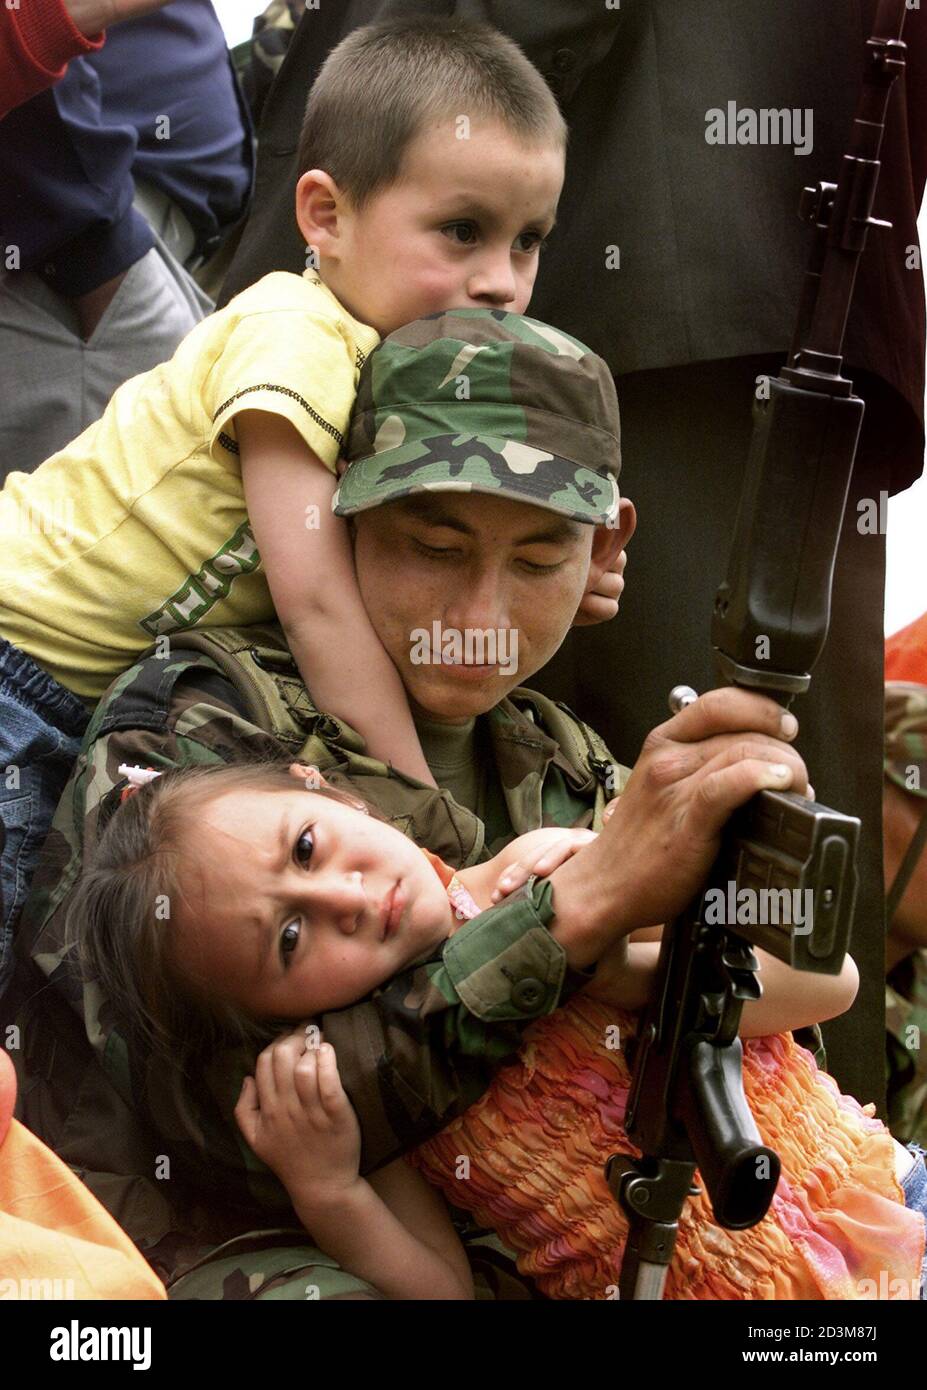 A newly conscripted Colombian soldier is hugged by his younger brother and his sister in Guasca, in the province of Cundinamarca, June 16, 2003. Some 10,000 new peasant soldiers will be sworn into duty across the country on Monday. The Colombian army capturing 58 suspected Marxist guerrillas in weekend raids and said on Monday it believed the operation had dealt a blow against rebel plans to carry out attacks in the capital. Those held are alleged members of the Revolutionary Armed Forces of Colombia, a 17,000-strong force known by the Spanish initials FARC. REUTERS/Daniel Munoz  EM/GN Stock Photo